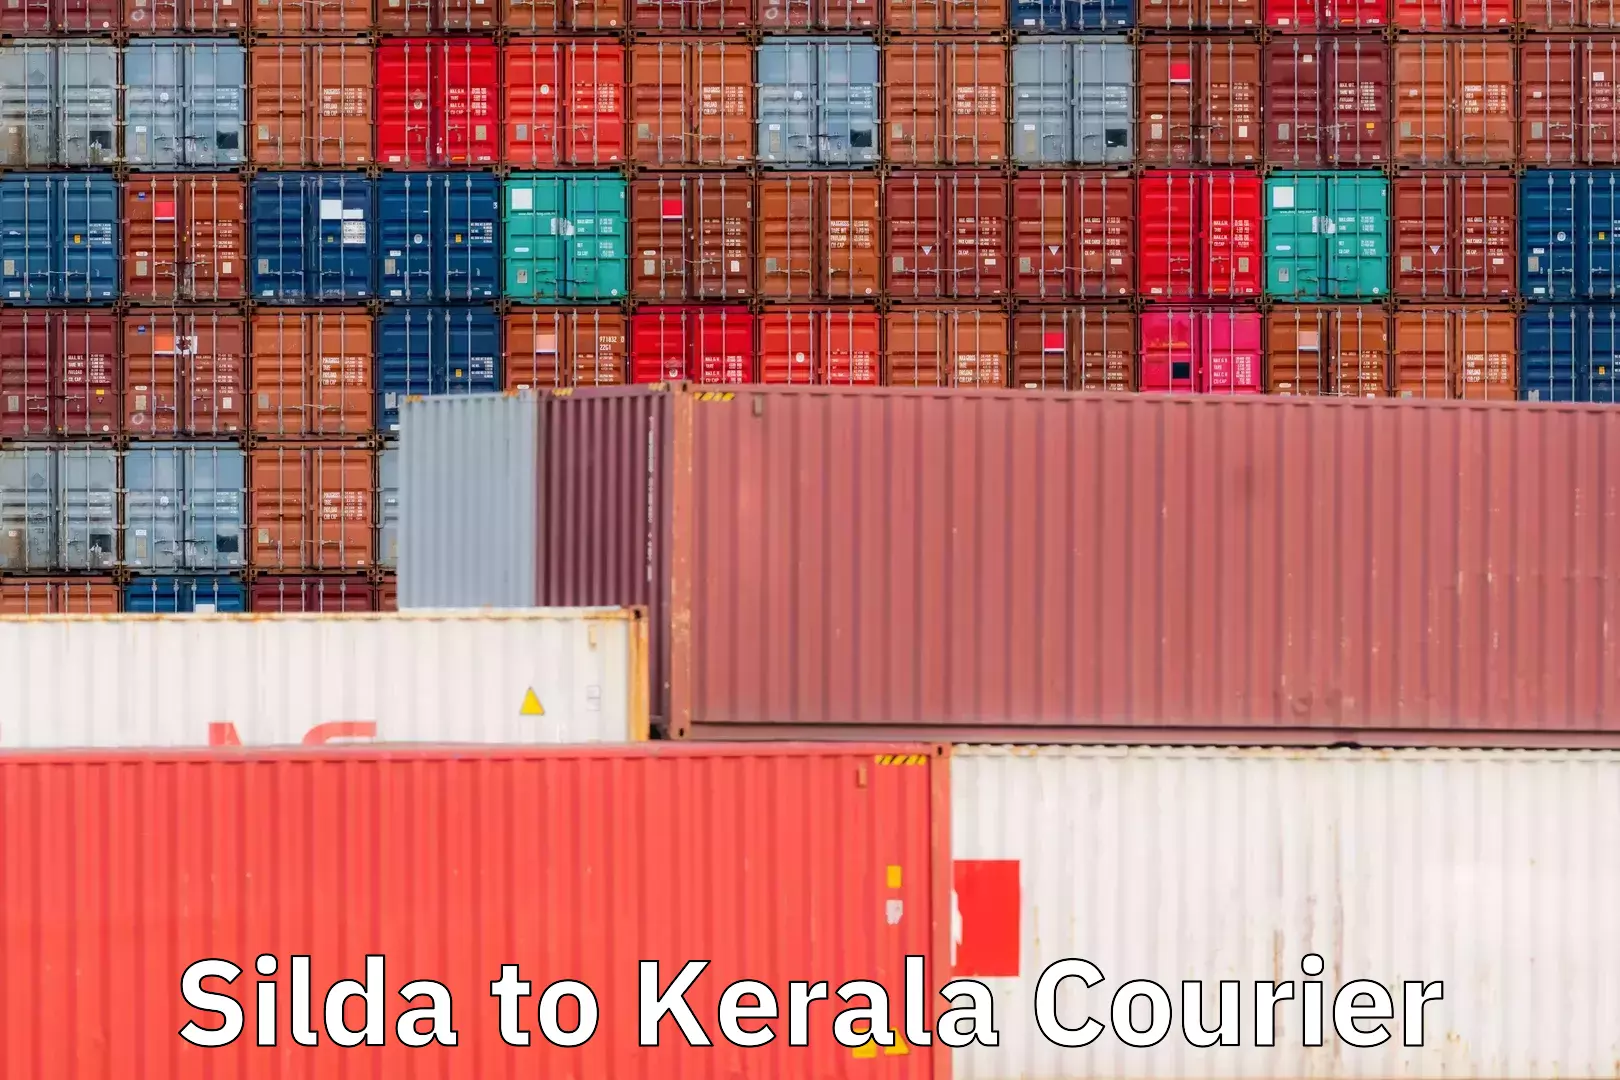 Express delivery capabilities Silda to Kerala